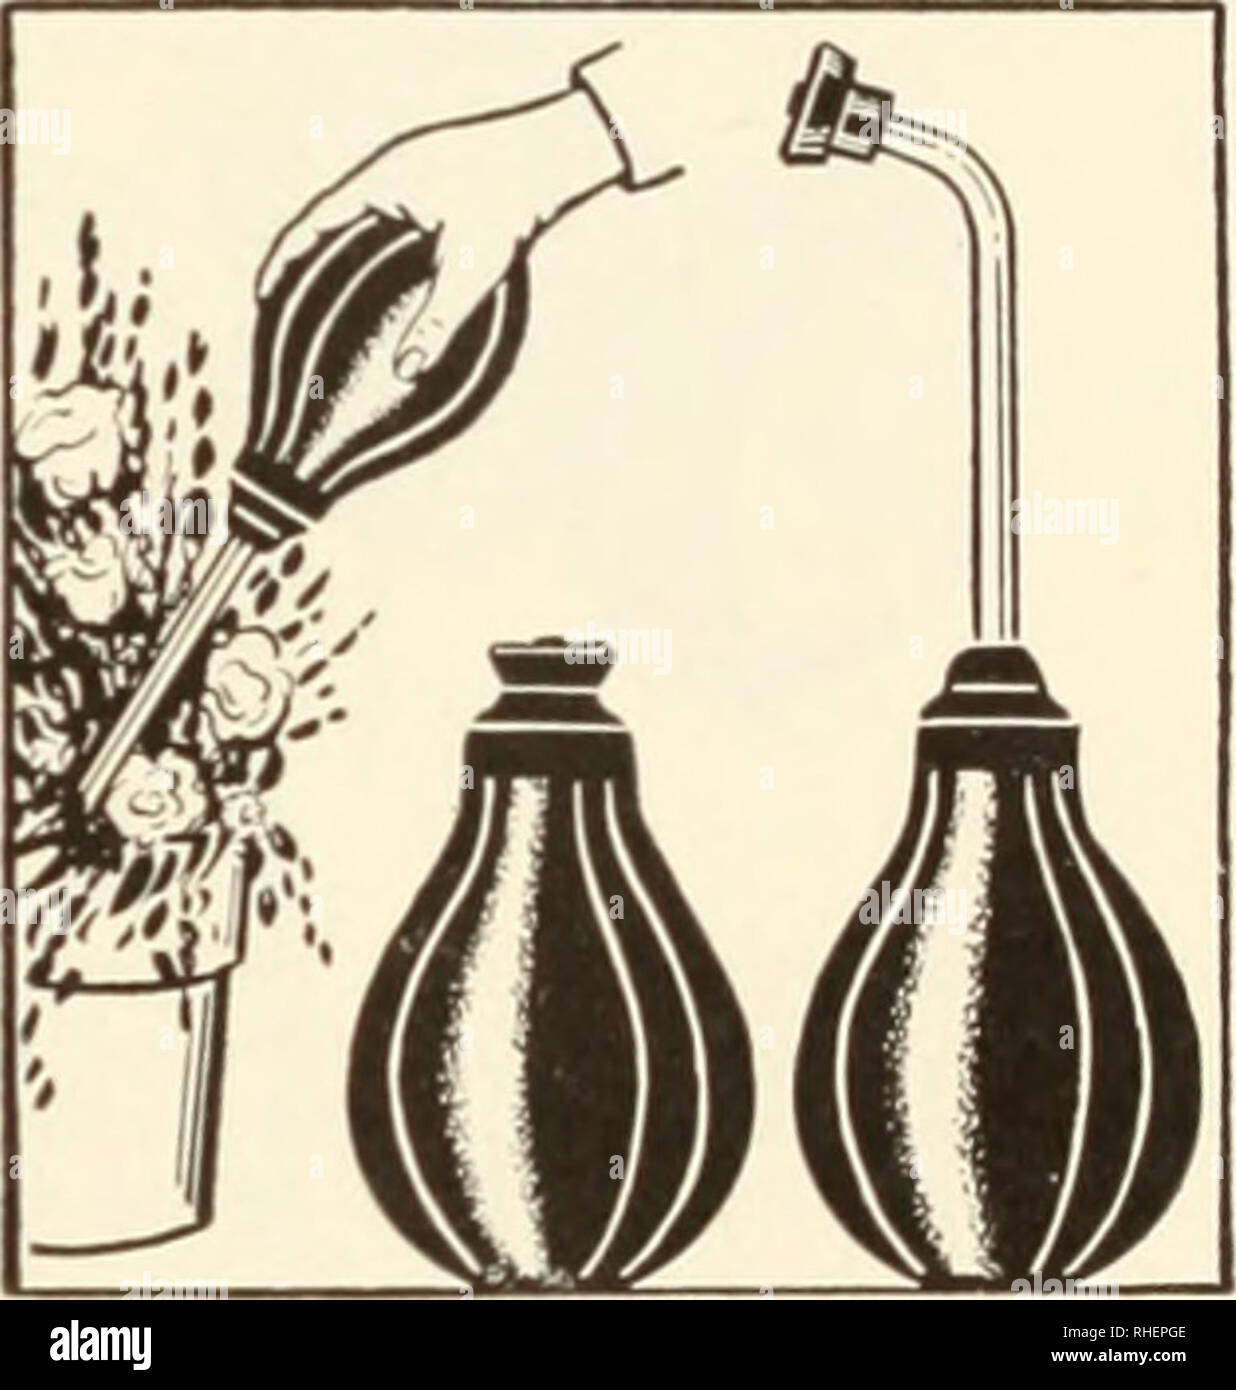 . Bolgiano's capitol city seeds : 1954. Nurseries (Horticulture) Catalogs; Bulbs (Plants) Catalogs; Vegetables Catalogs; Garden tools Catalogs; Seeds Catalogs. 20 ft $2 35 35 ft 3 55 50 ft S4 75 Resinite Flexible Twin Tube Sprinkler 25 ft S3 85 50 ft J5 85 I ike all-night rain. Water seeps through entire length. Puts water where you want it —at the roots. No run-off No waste- No. 0. 12 ft. Si 80 No. 1. 18 It... 2 40 I -No soil-washing No. 2. 30 ft...$3 70 No. 3. 50 ft... 6 00 Sprabulb and Cetrospray. For years llorists, seedsmen and house- wives throughout the U. S. A. have found the handy Spr Stock Photo